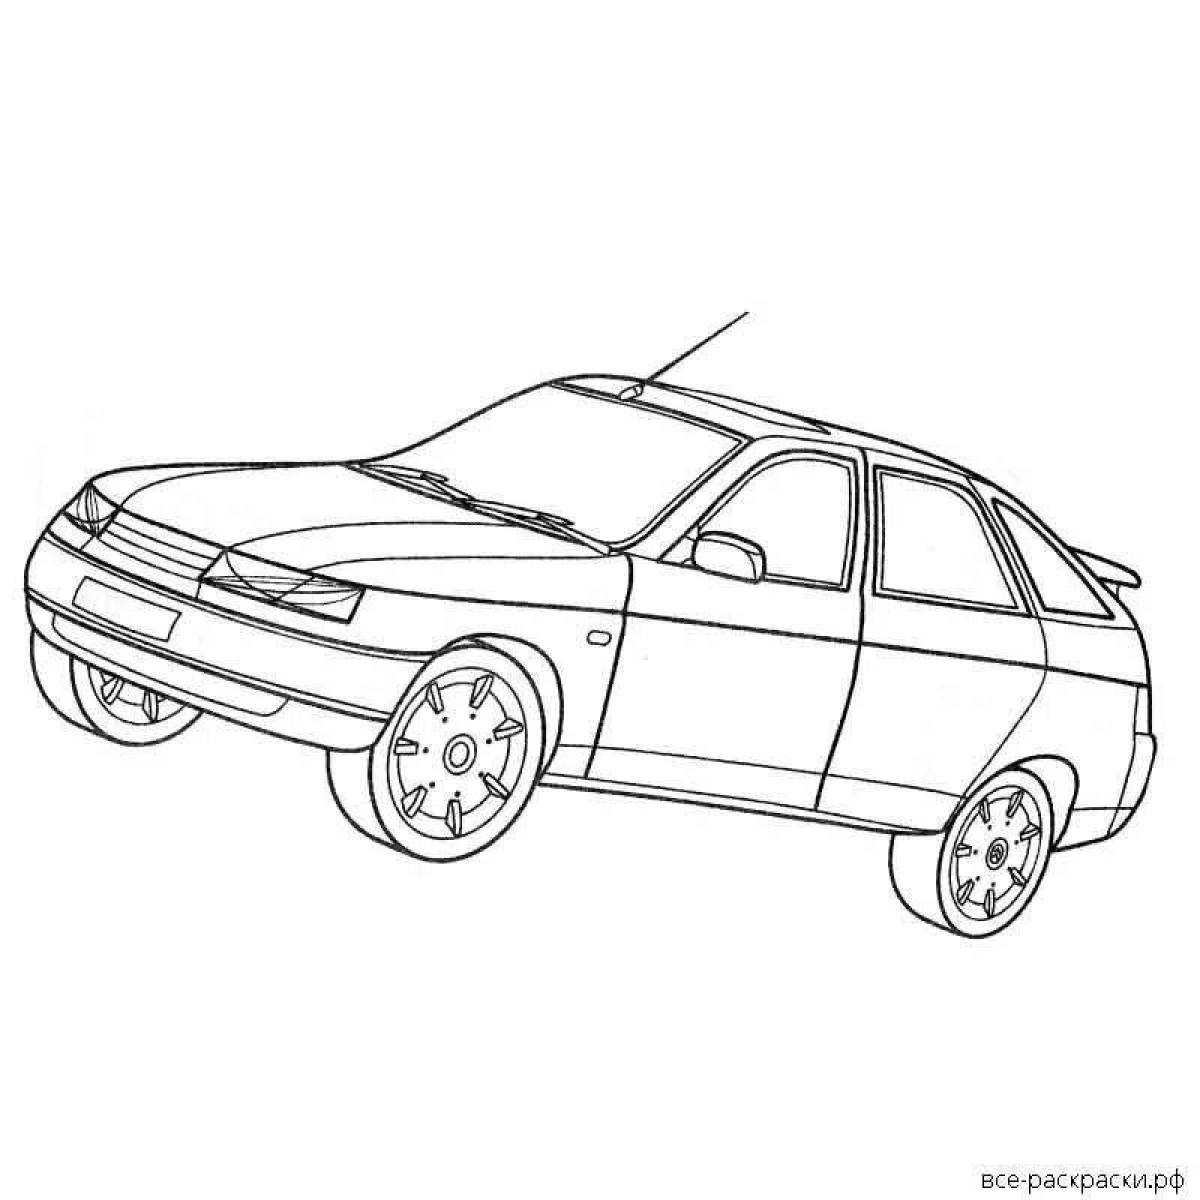 Coloring page dynamic cars fret